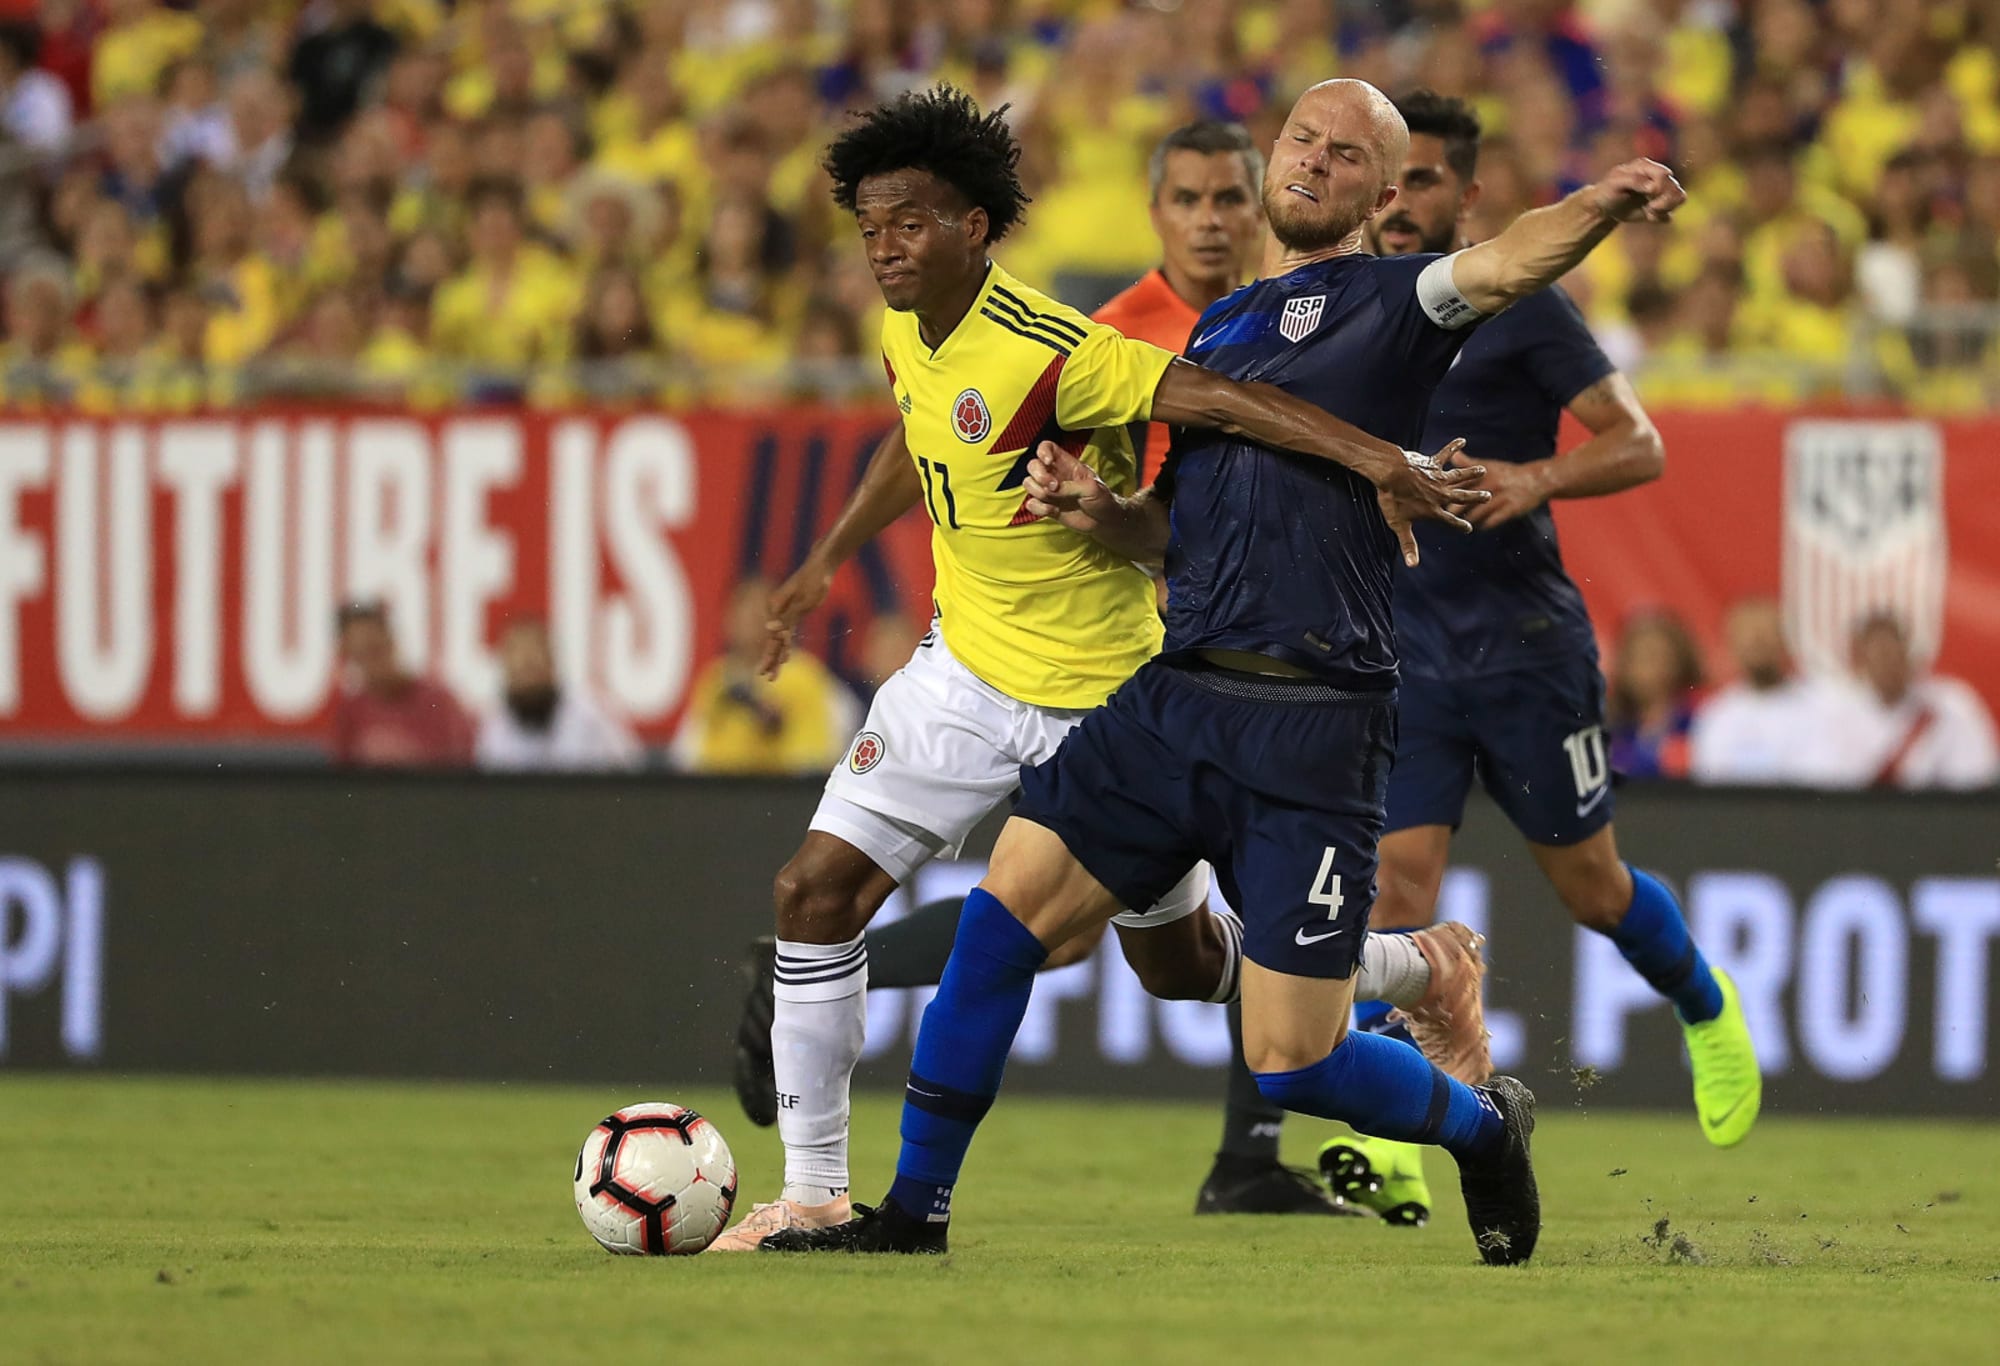 USMNT Vs Colombia The problem with U.S. sports culture